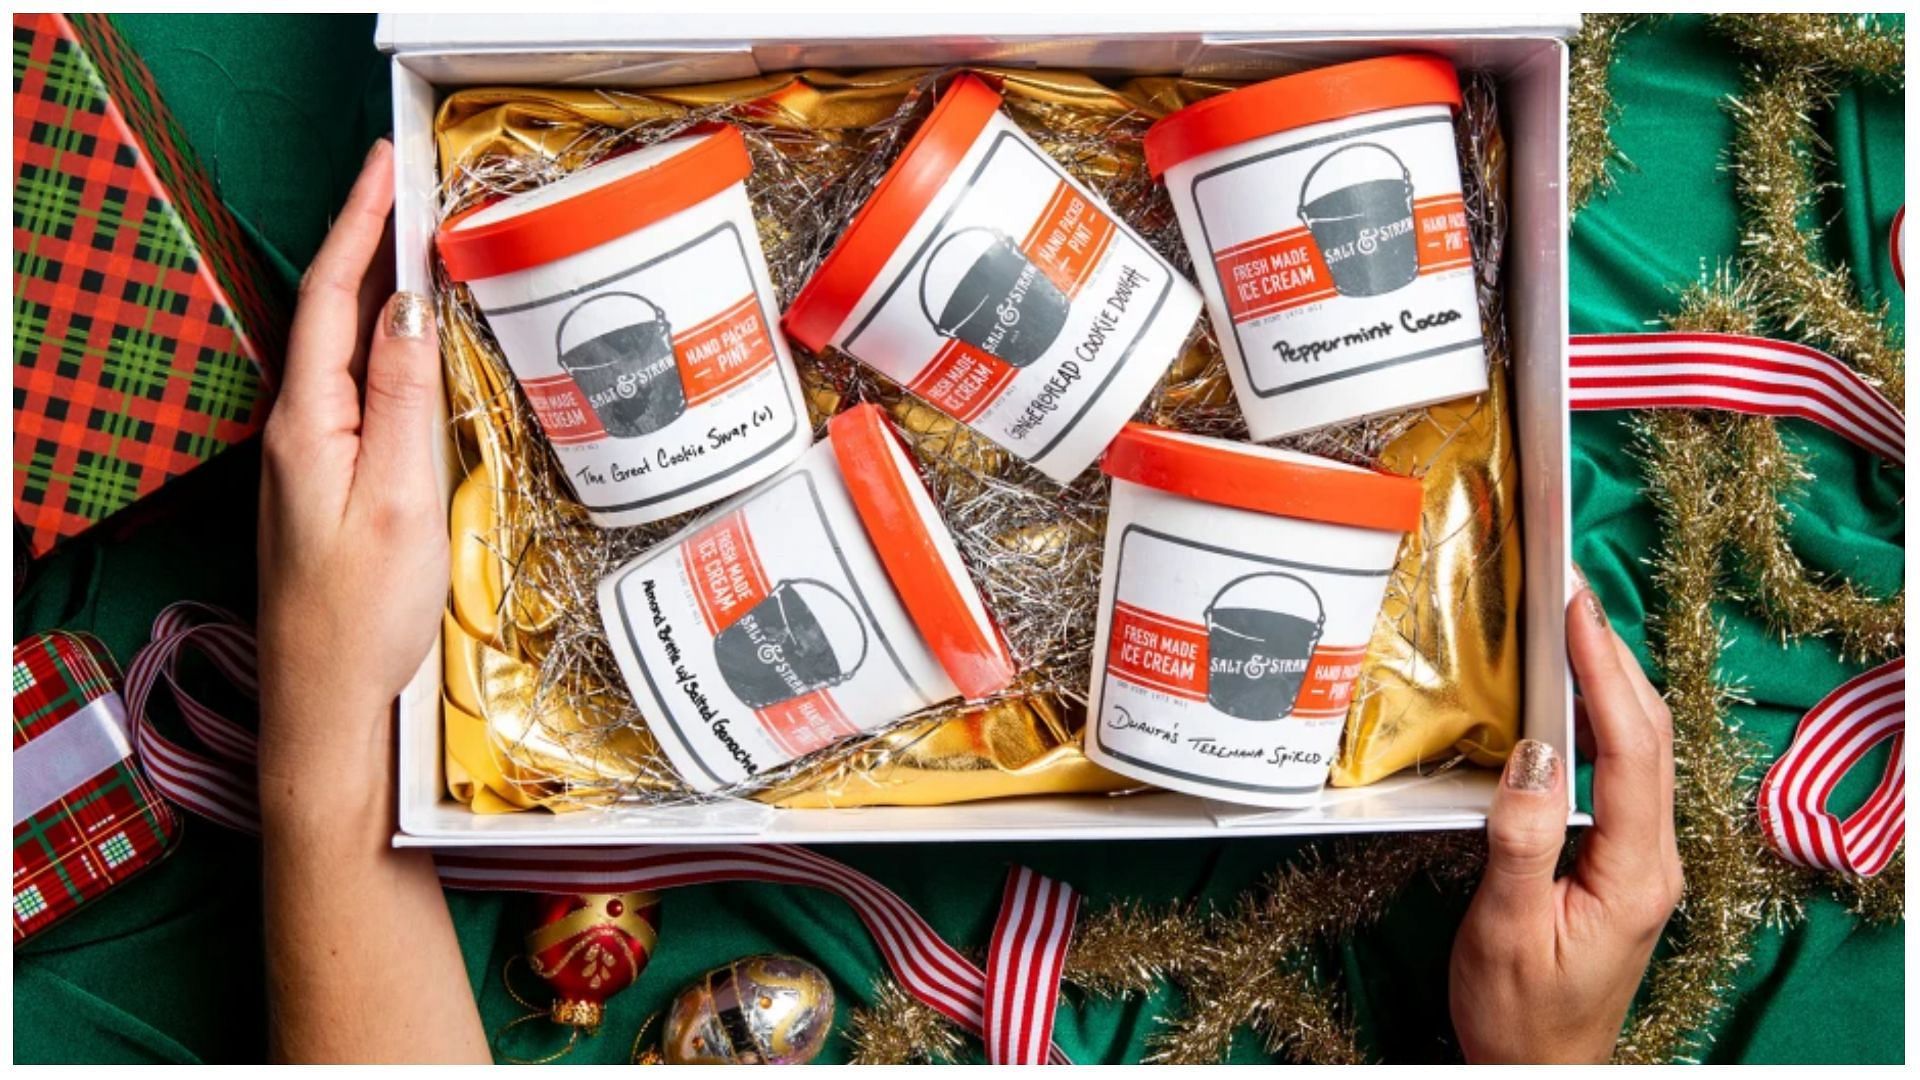 Salt & Straw 2022 holiday series Ice cream flavors, prices, deals, and